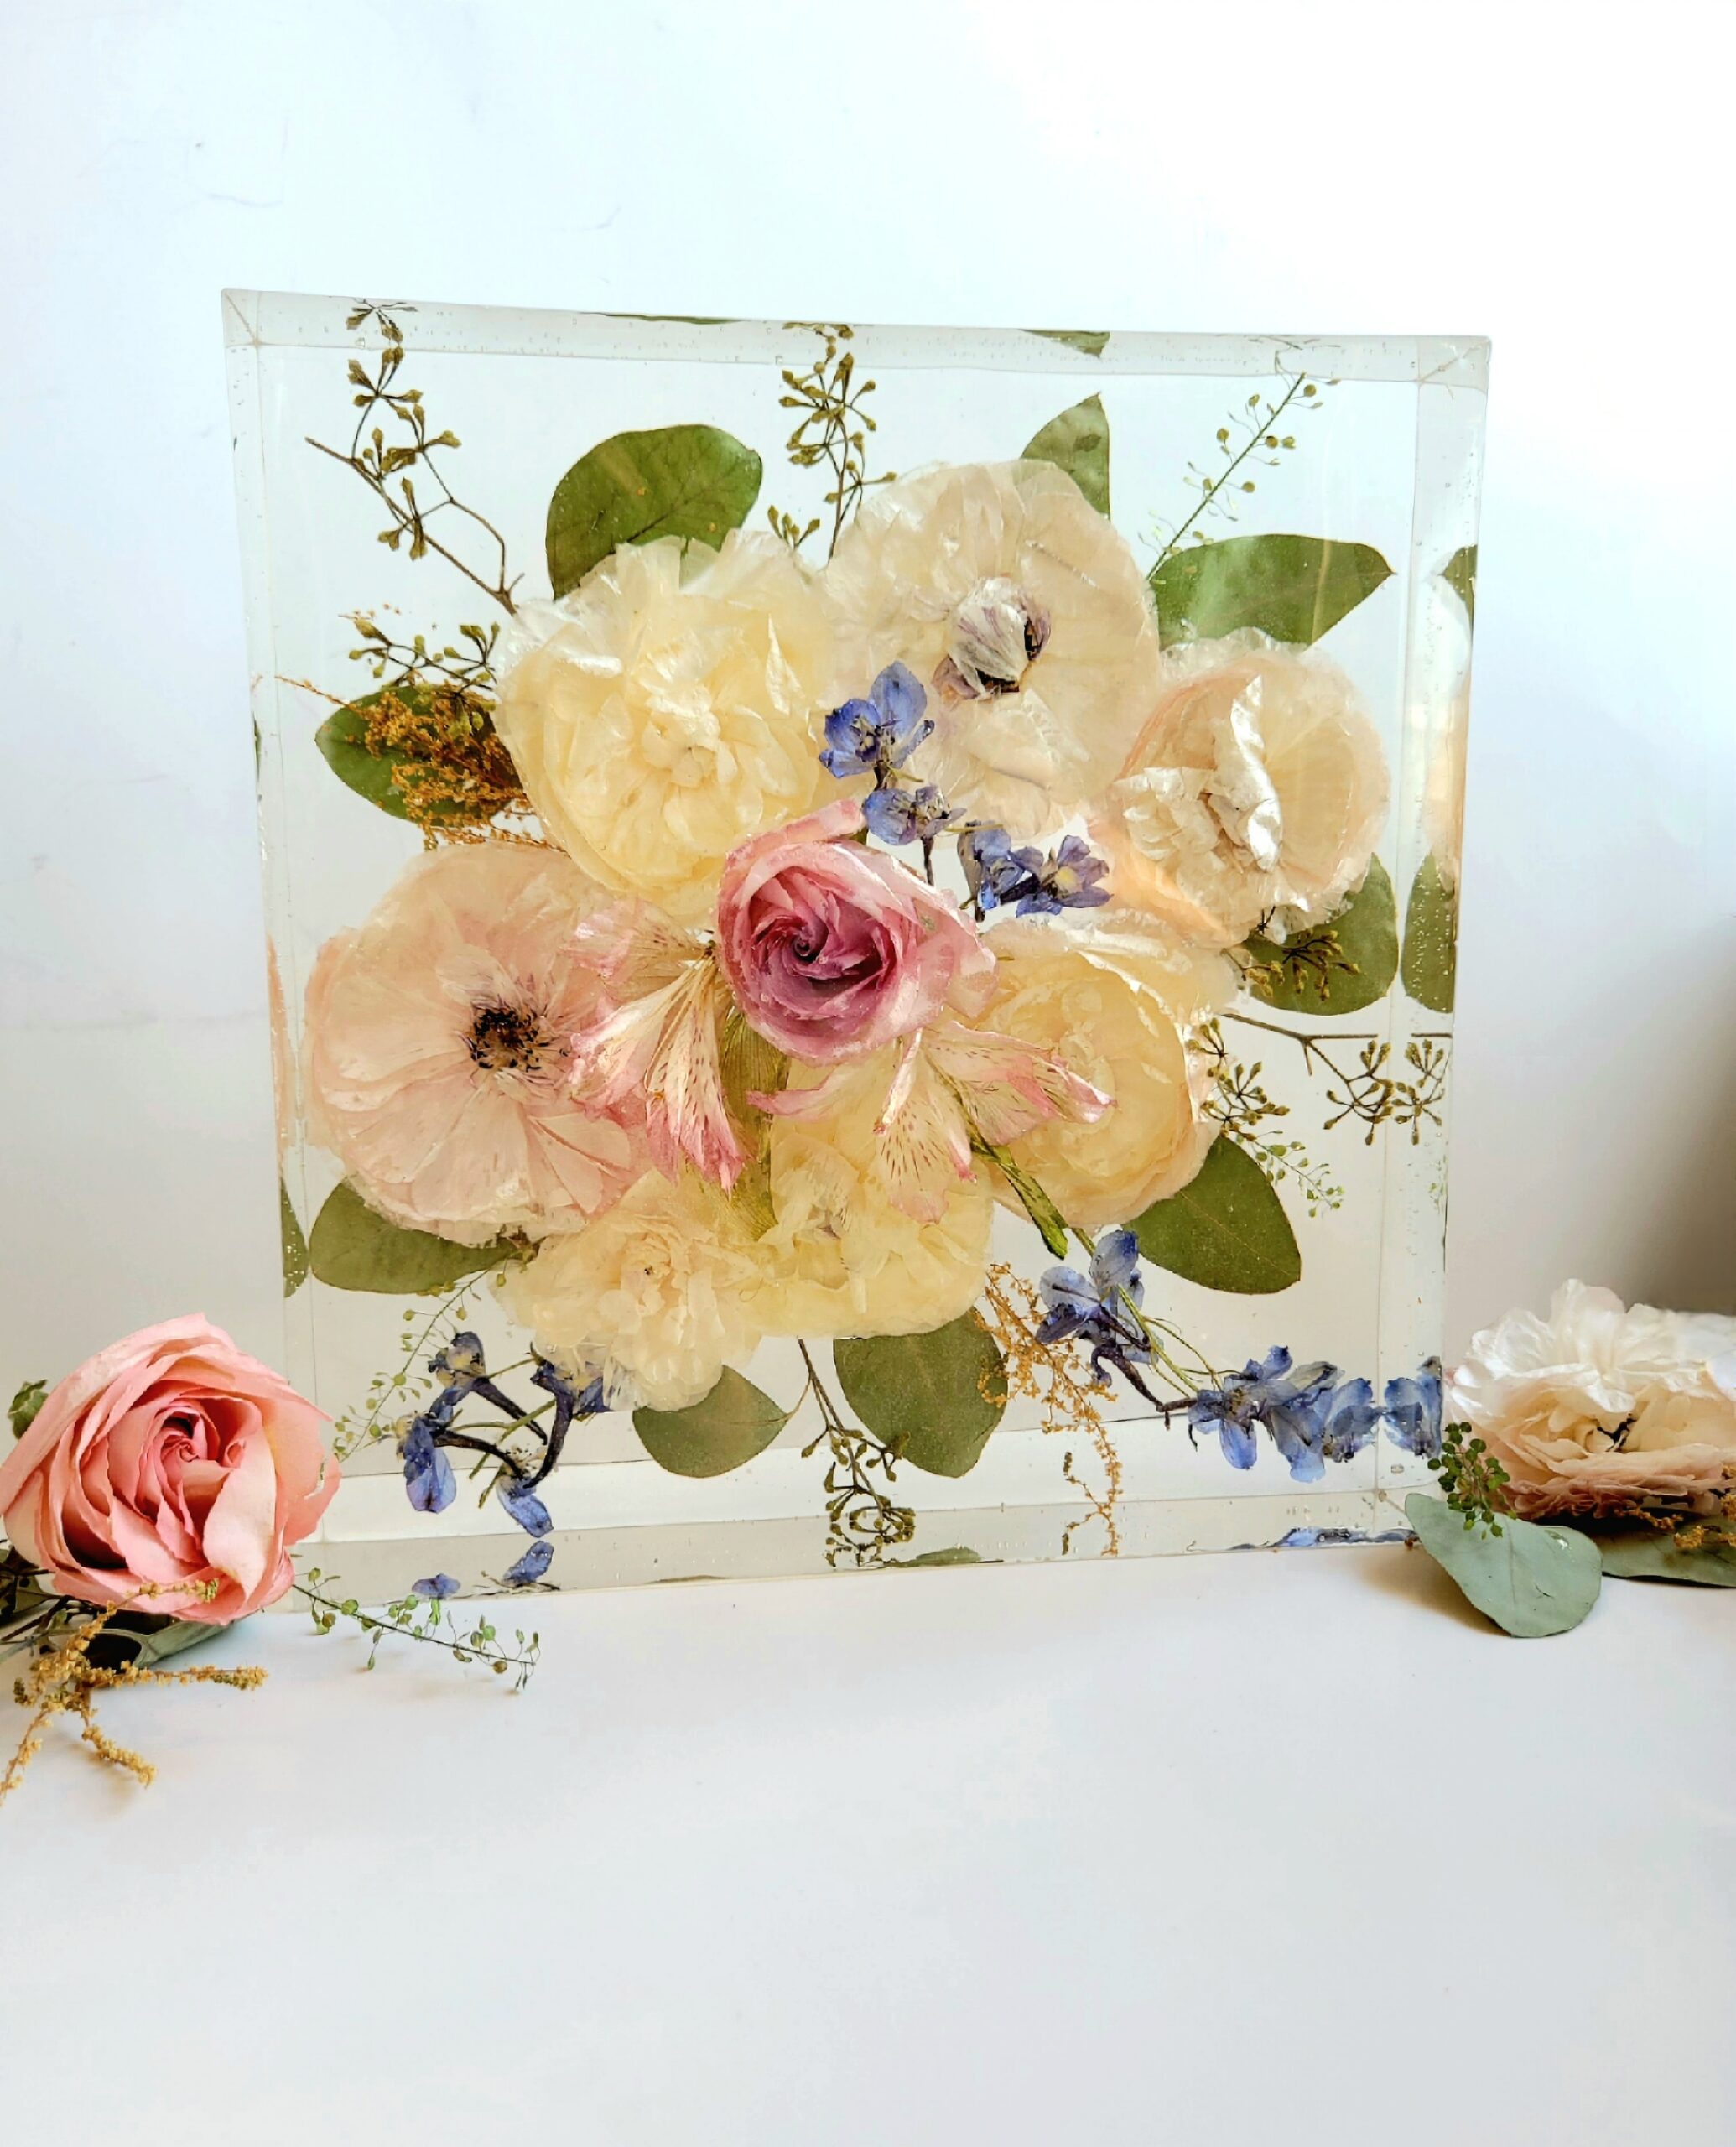 B Creative Floral Preservation, an NJ floral preservation business, offers in-person consultations.